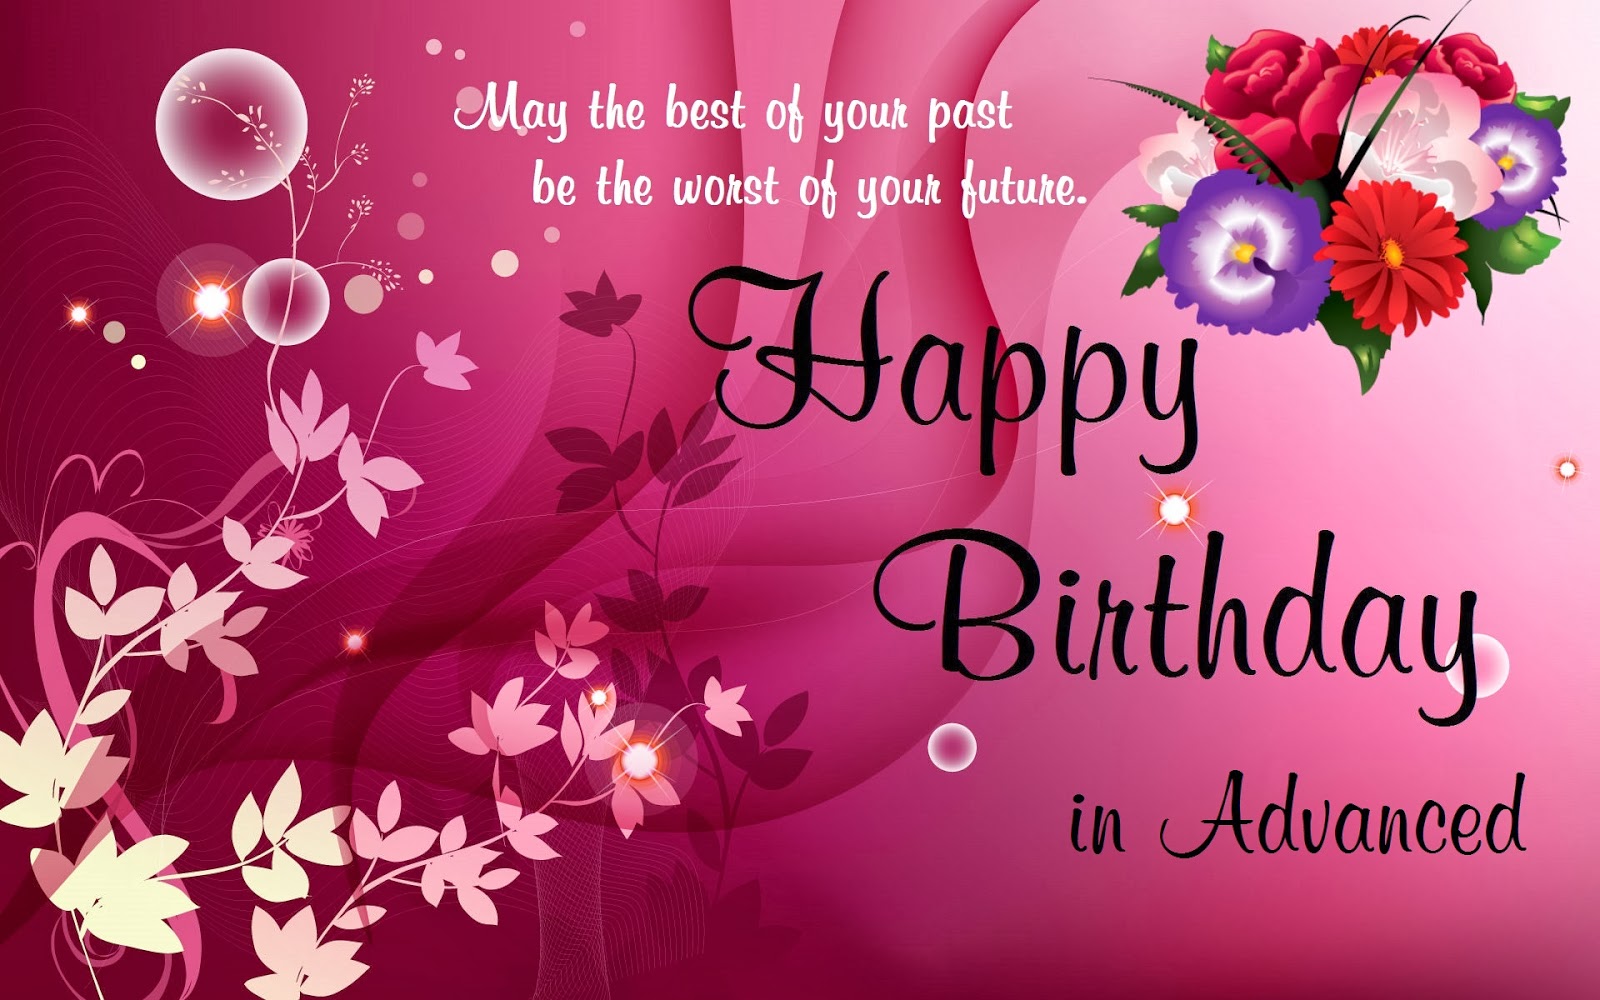 Happy Birthday Messages, wishes, images and - Best Birthday Message